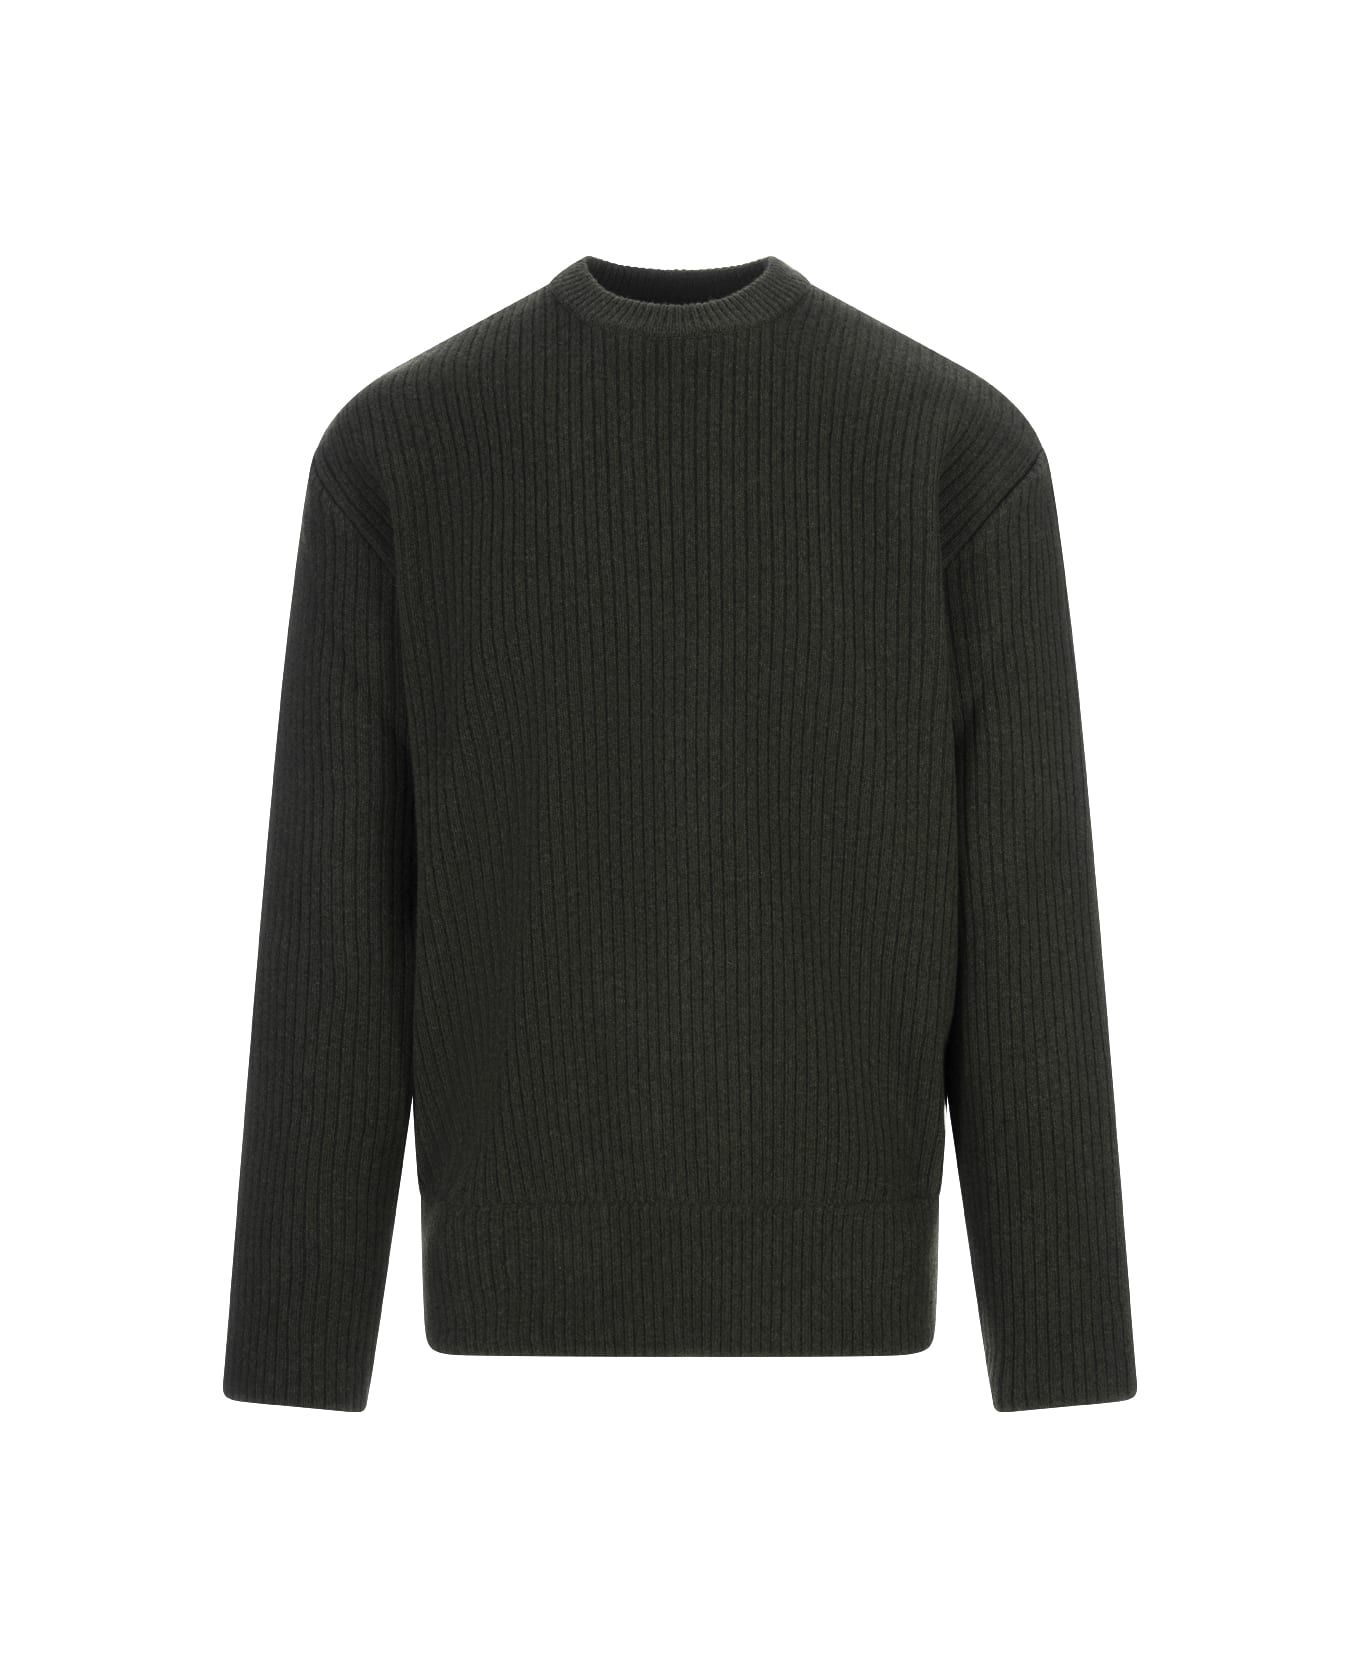 Givenchy Ribbed Sweater - Green